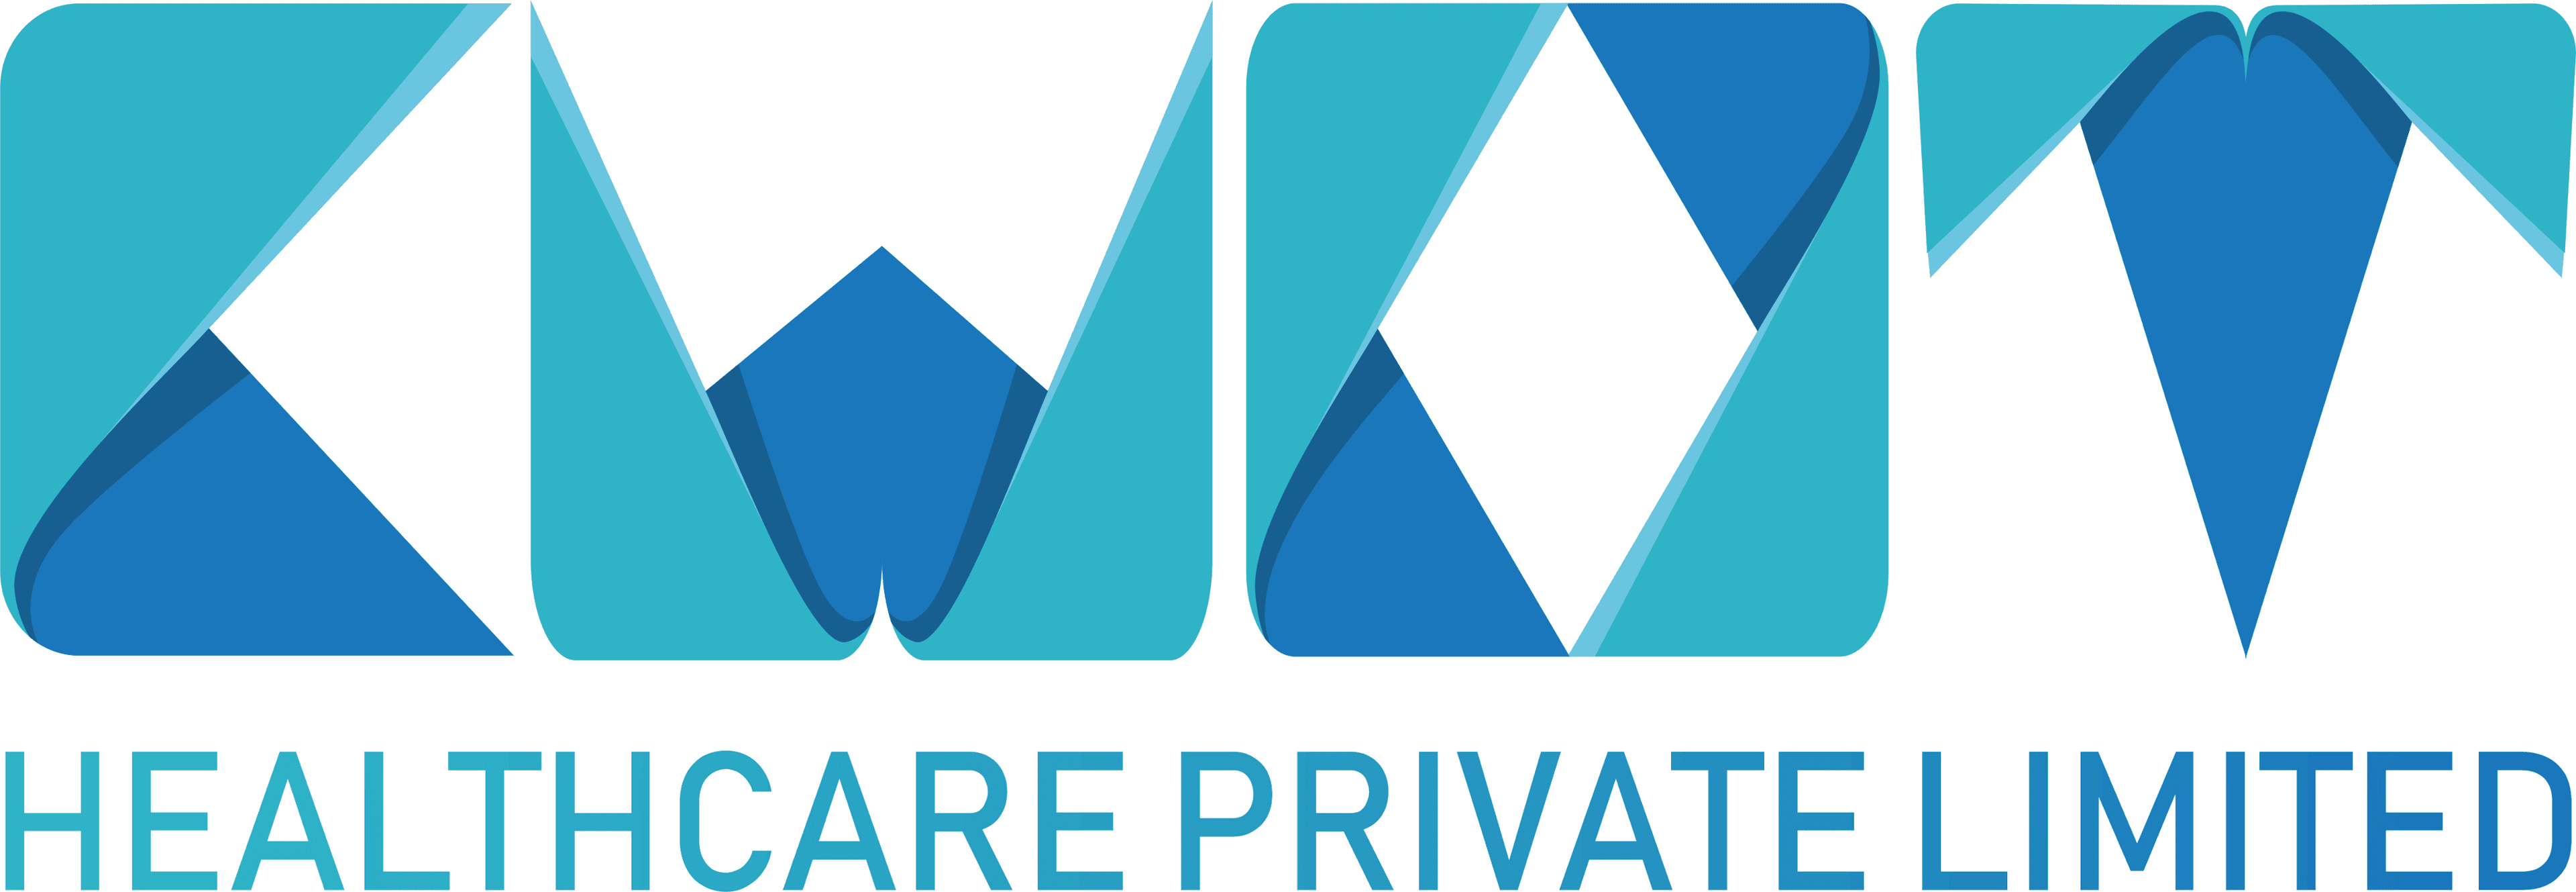 KWOT HEALTHCARE PRIVATE LIMITED